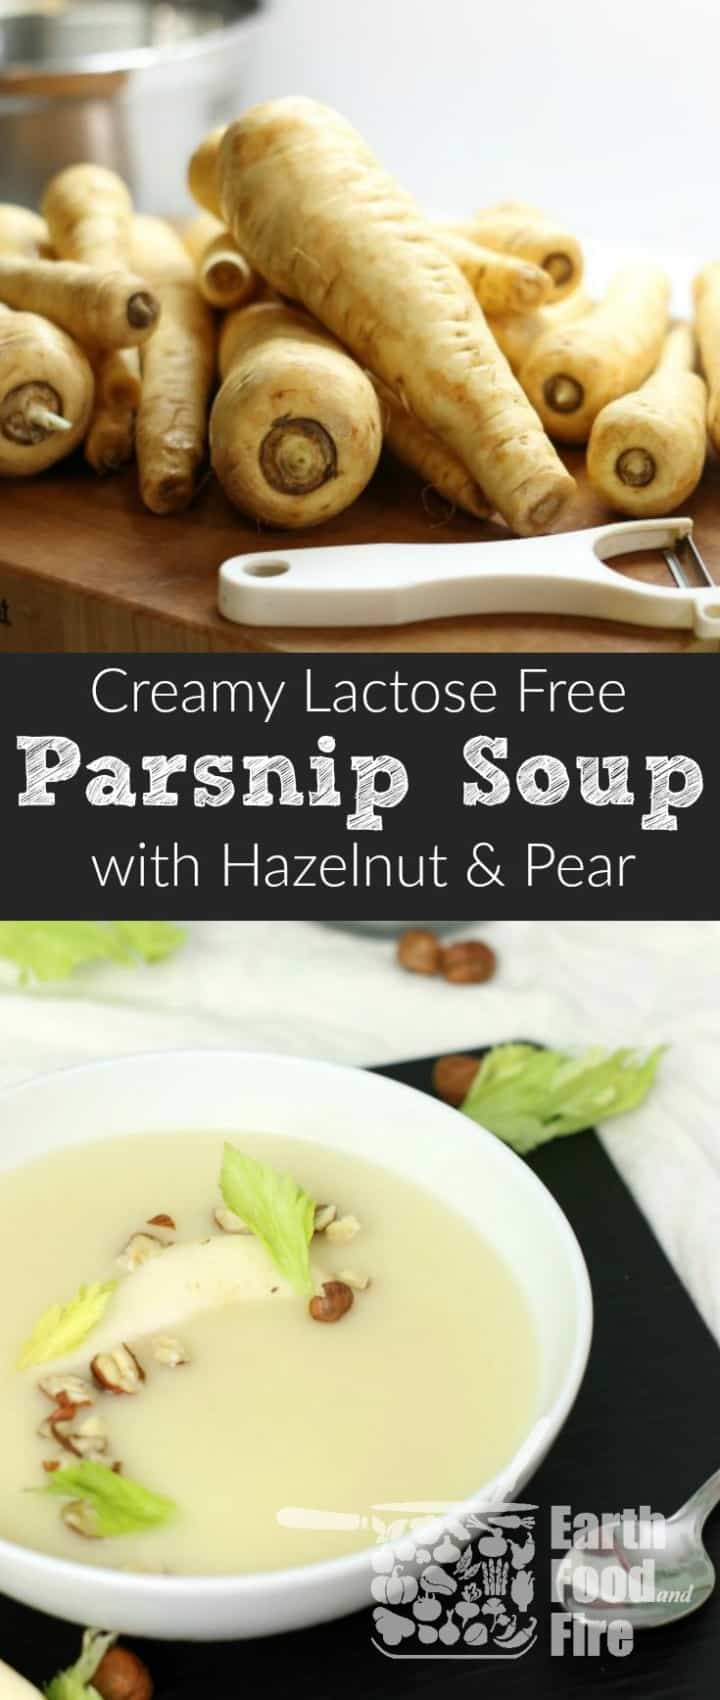 Silky smooth with a hint of pear and hazelnuts, this lactose free creamy parsnip soup is ideal for a fall inspired appetizer or meal. #lactosefree #paleo #glutenfree #parsnip #soup